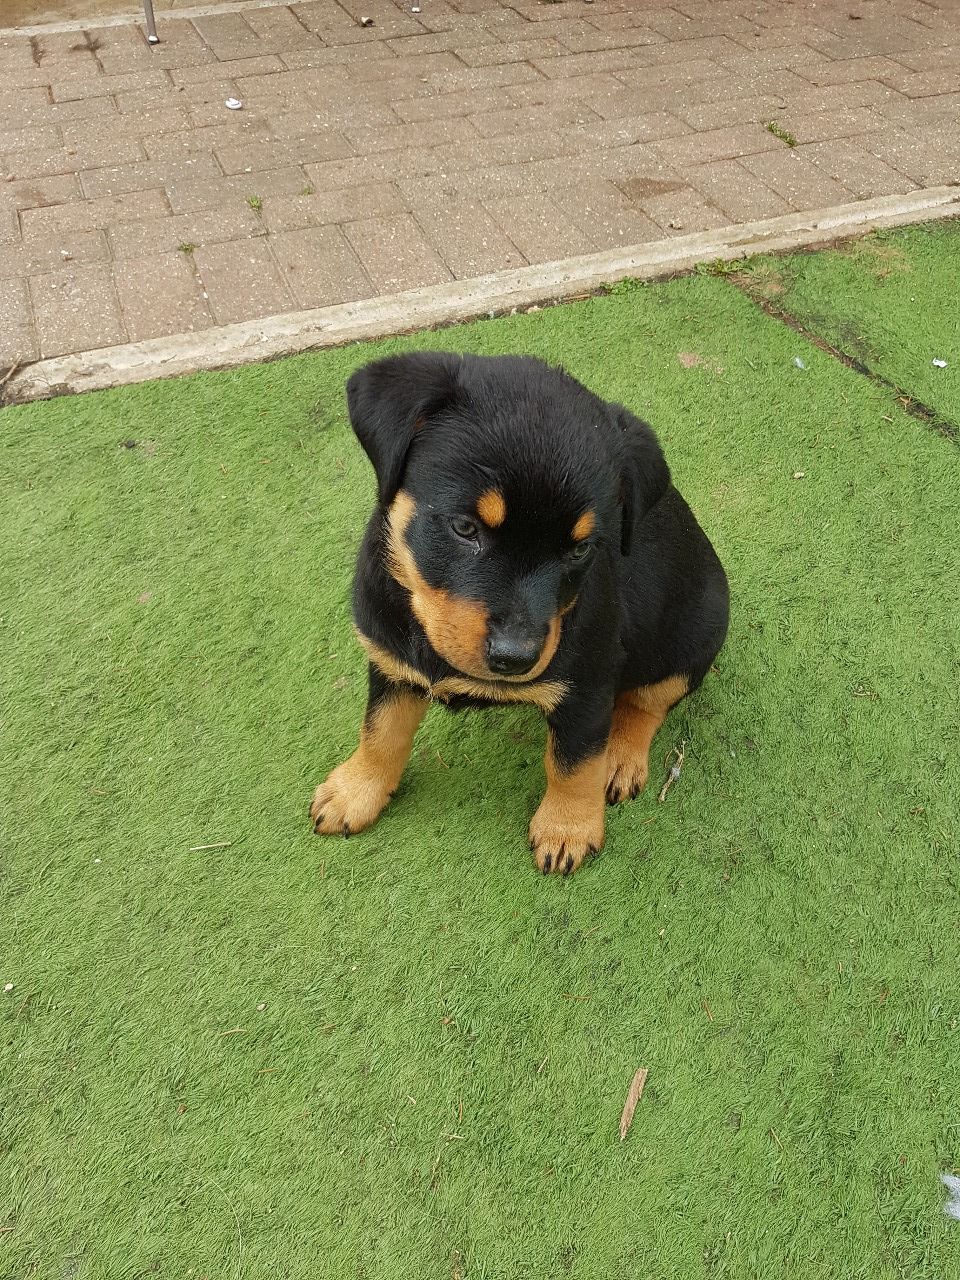 Rottweiler puppies for adoption Classifieds.uk Free